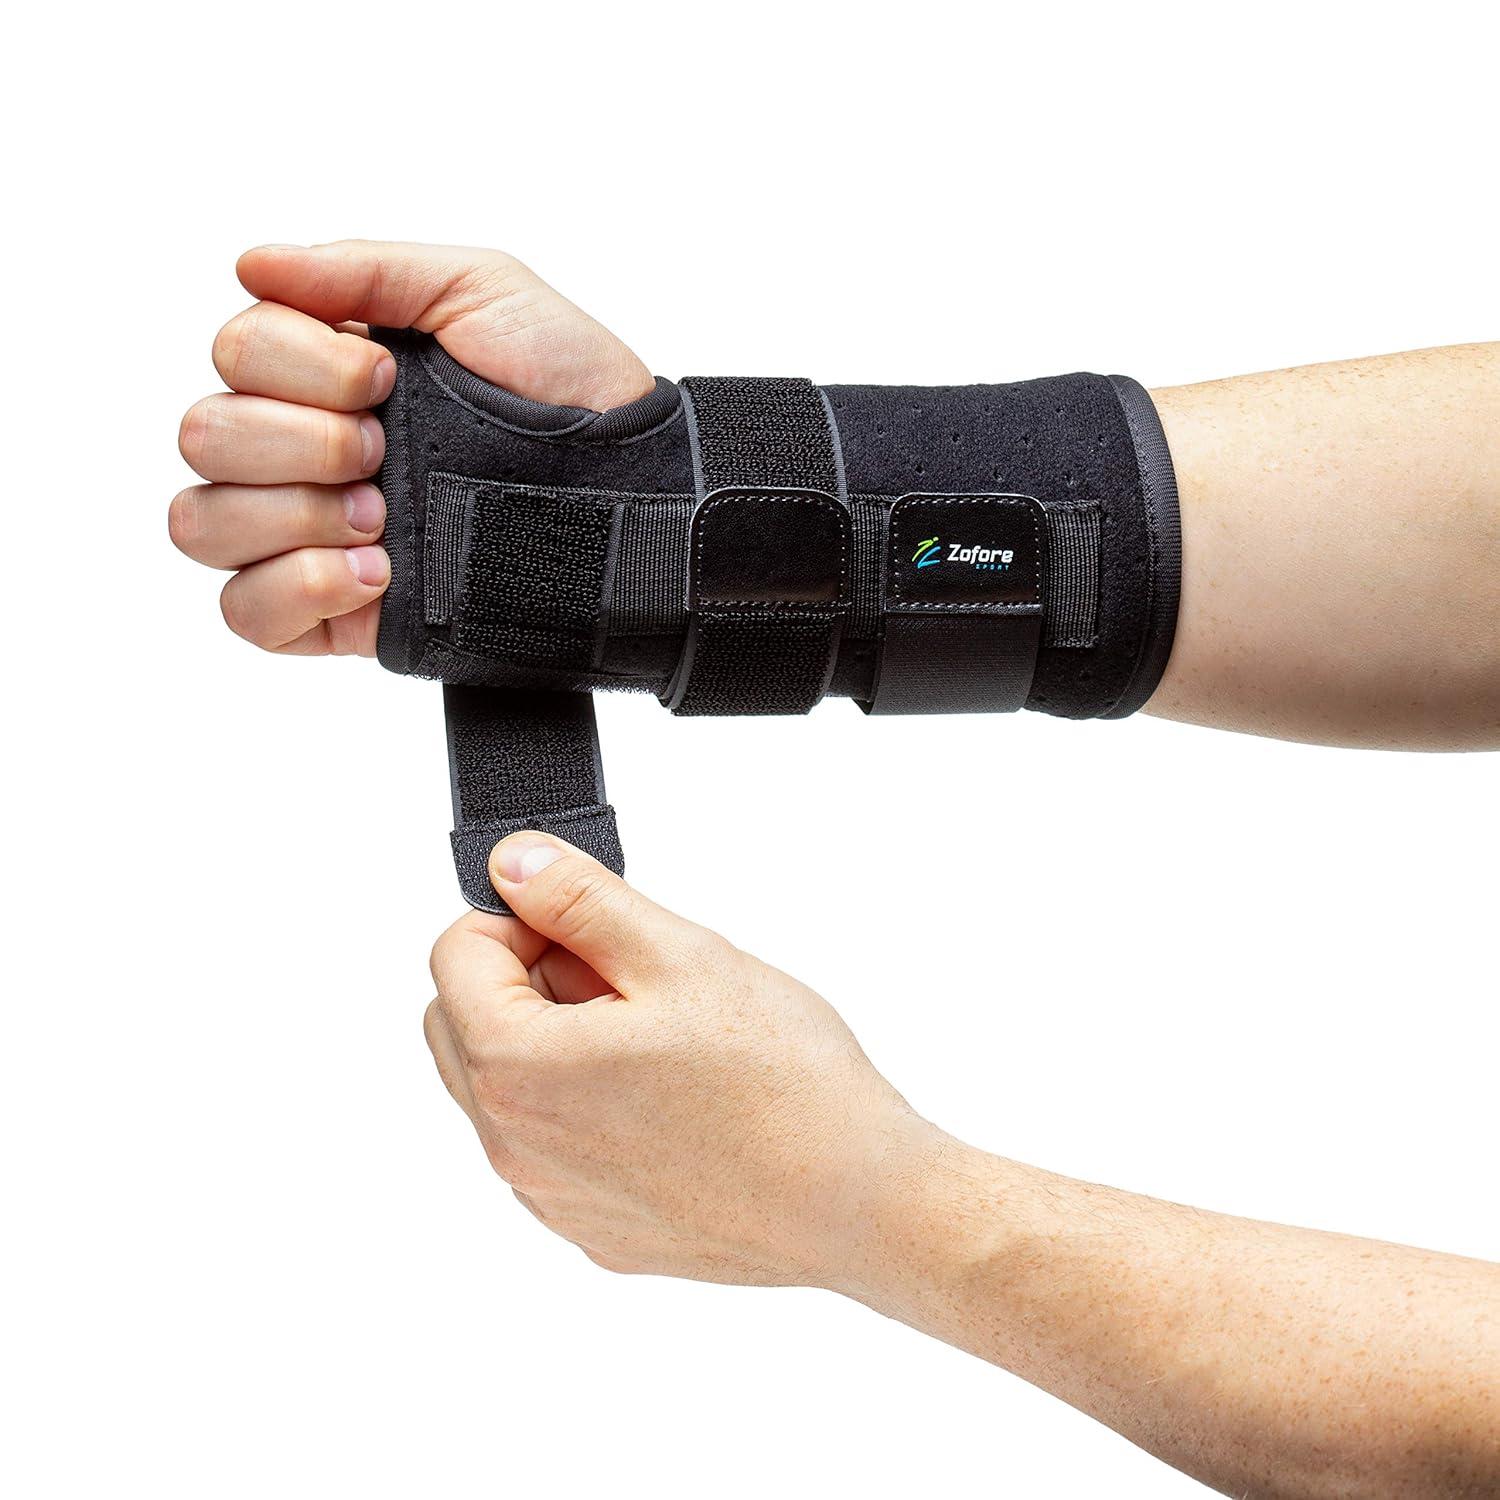  Carpal Tunnel Wrist Brace Support with 2 Straps and Metal Splint  Stabilizer - Helps Relieve Tendinitis Arthritis Carpal Tunnel Pain -  Reduces Recovery Time for Men Women - Left (S/M) 